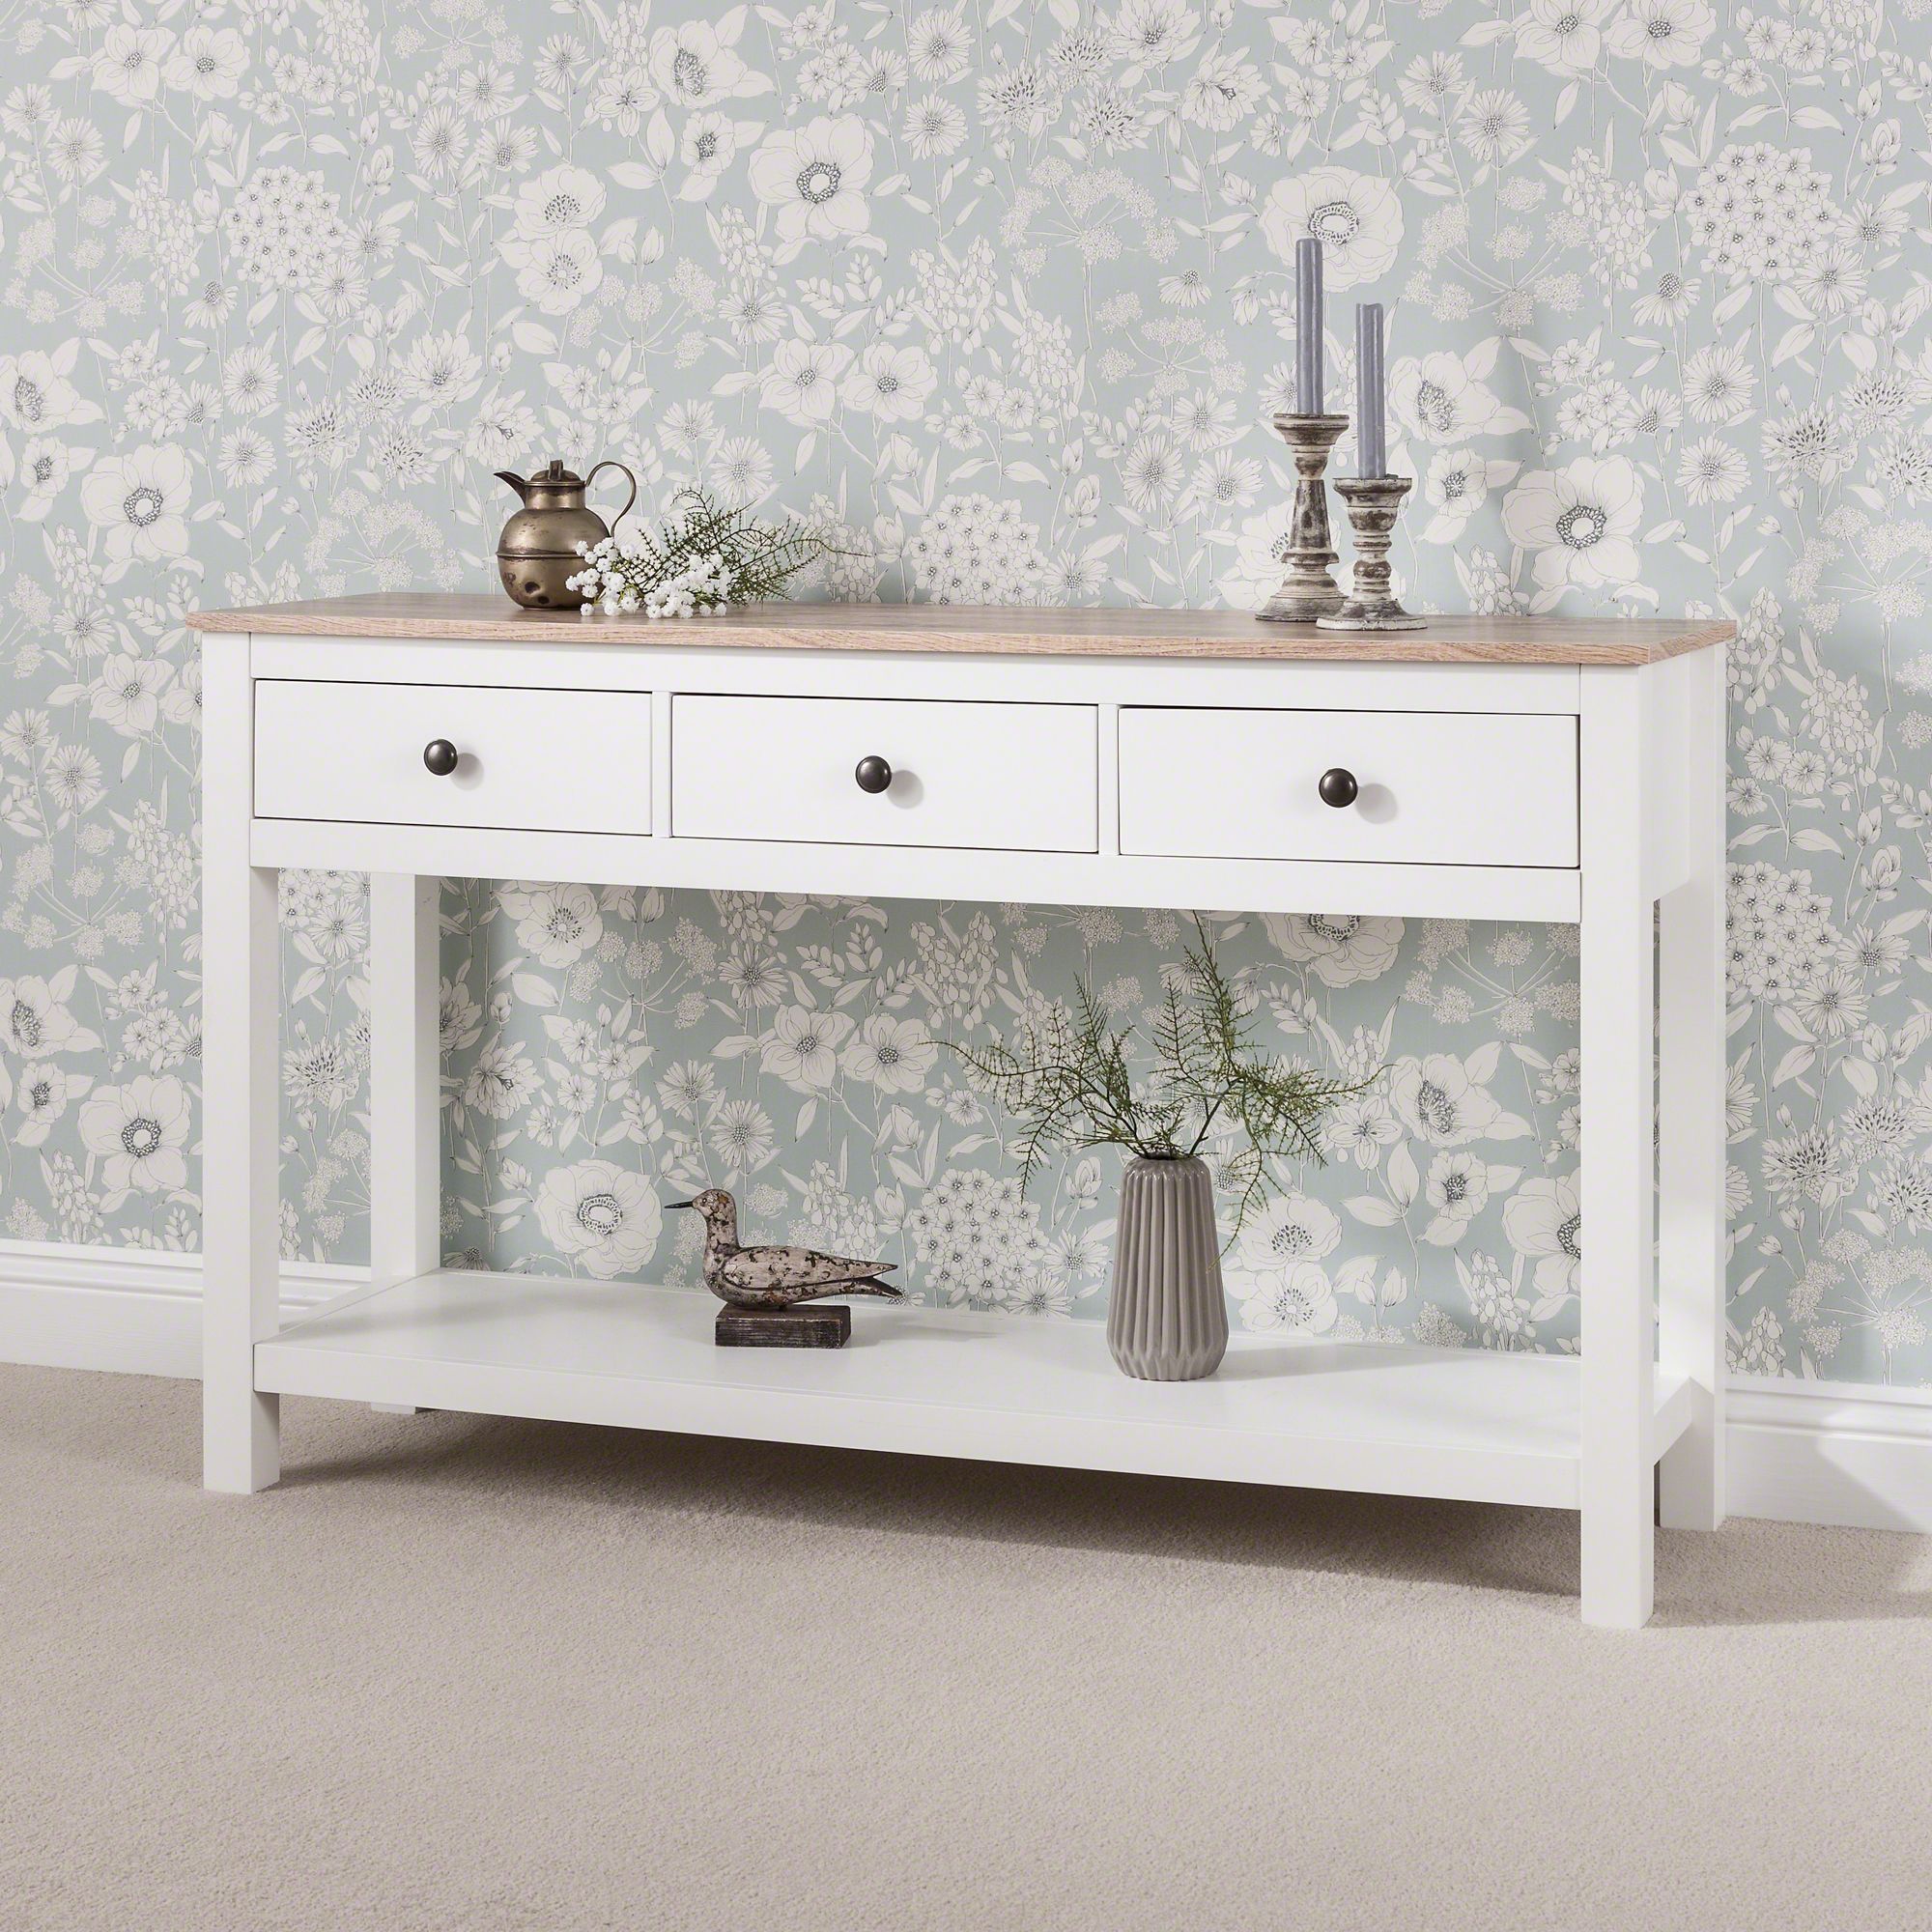 Laura James White Console Table With 2 & 3 Drawers And Shelf | Ebay Regarding Geometric White Console Tables (View 6 of 20)